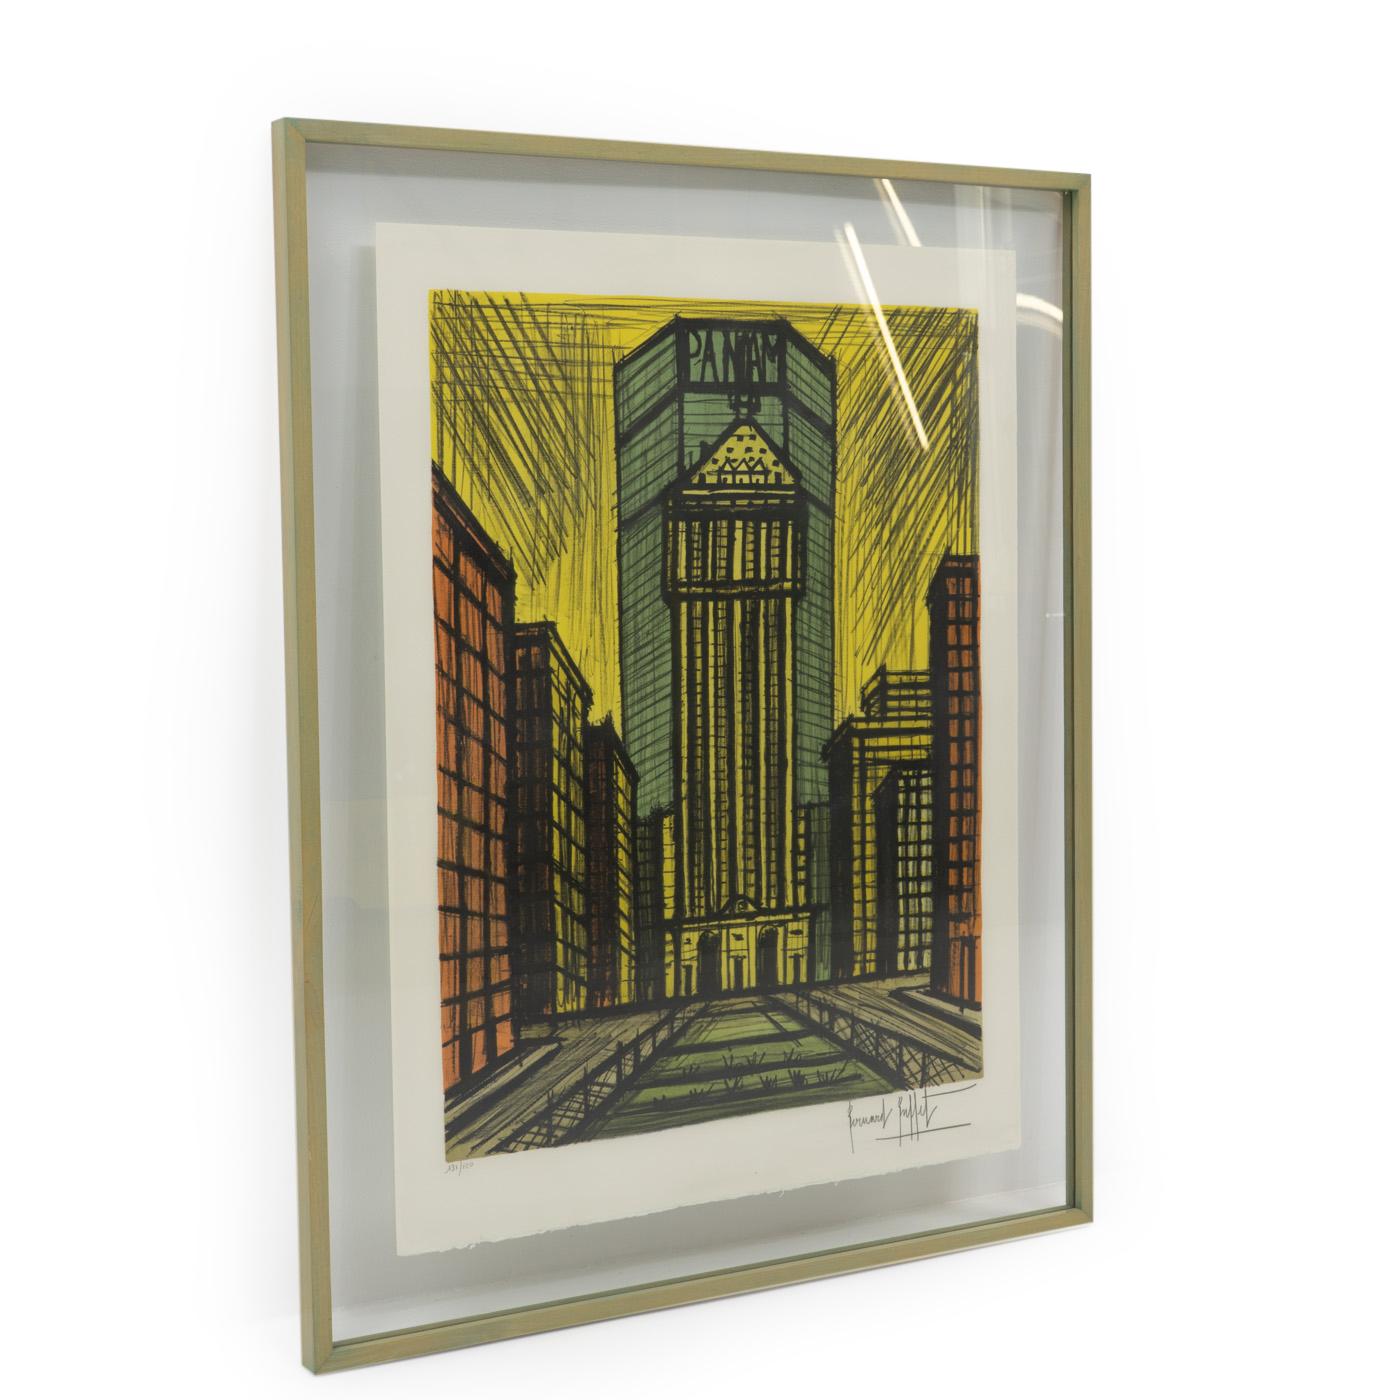 Rare colour lithograph by Bernard Buffet ( 1928 – 1999) depicting the Panam building, New York City. The lithograph is in excellent condition, professionally framed, and signed and numbered by the artist. 


About the artist:

Bernard Buffet was a